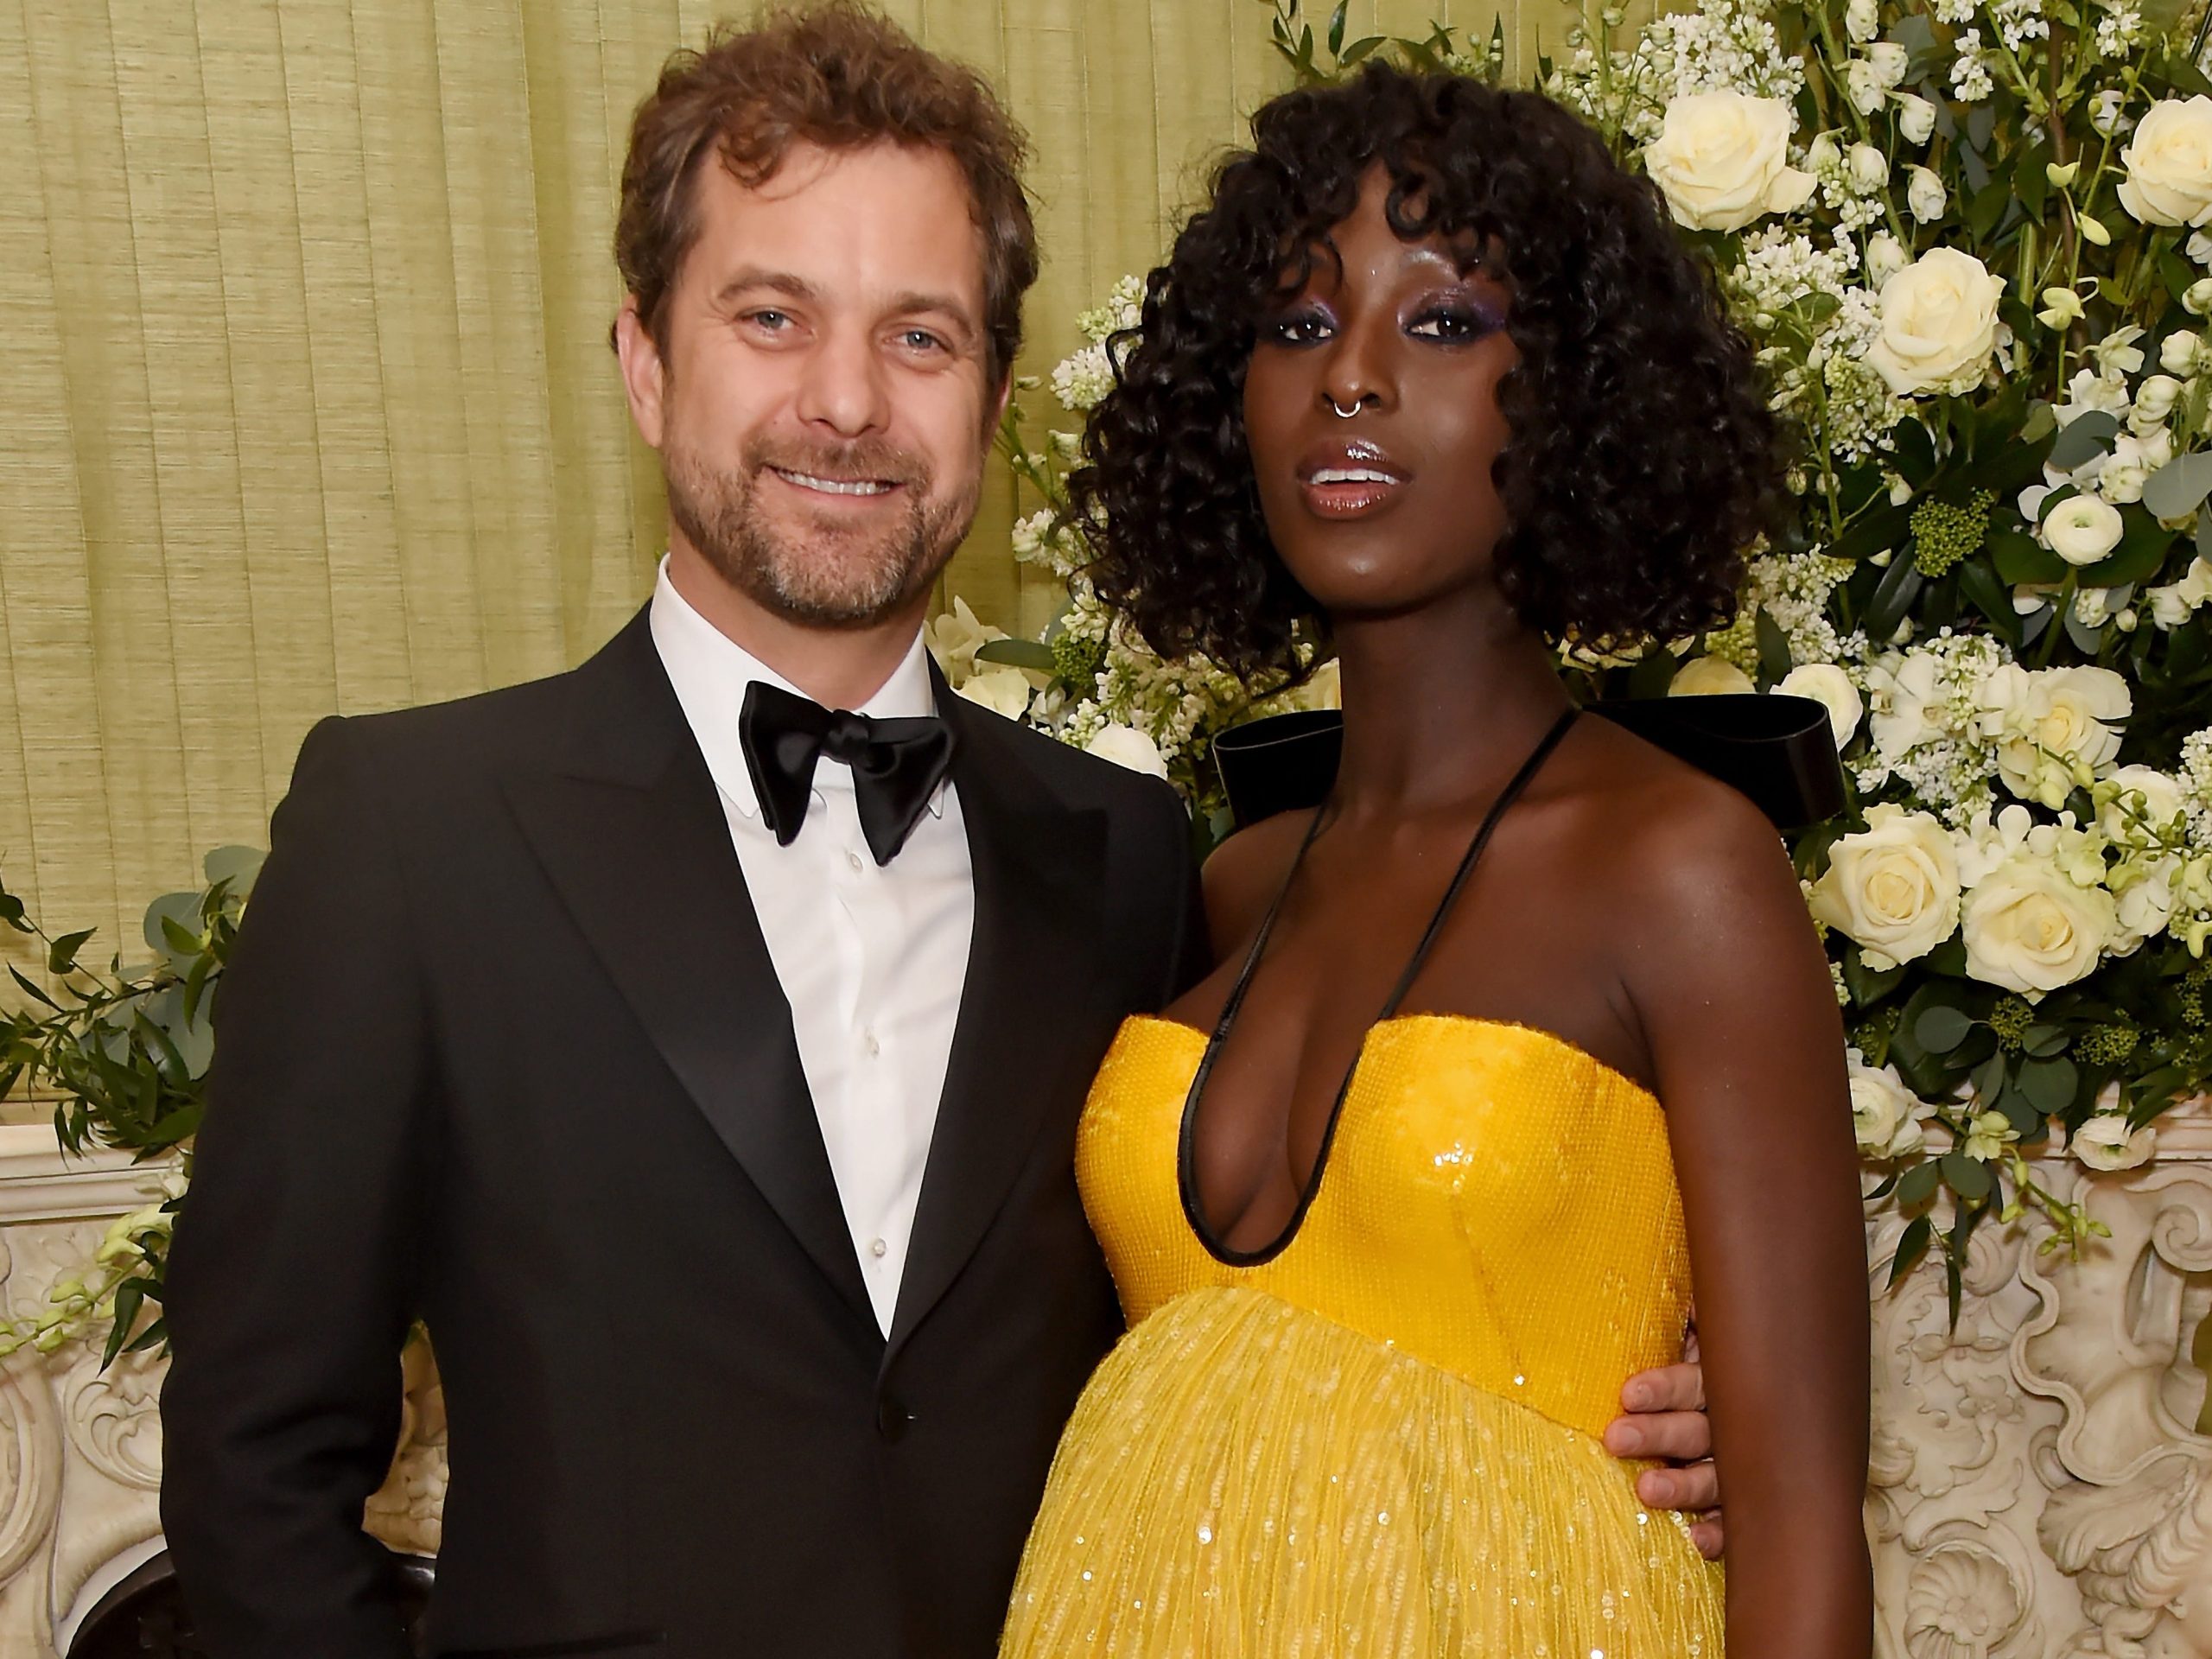 Joshua Jackson stands with his arm around his wife, Jodie Turner-Smith.